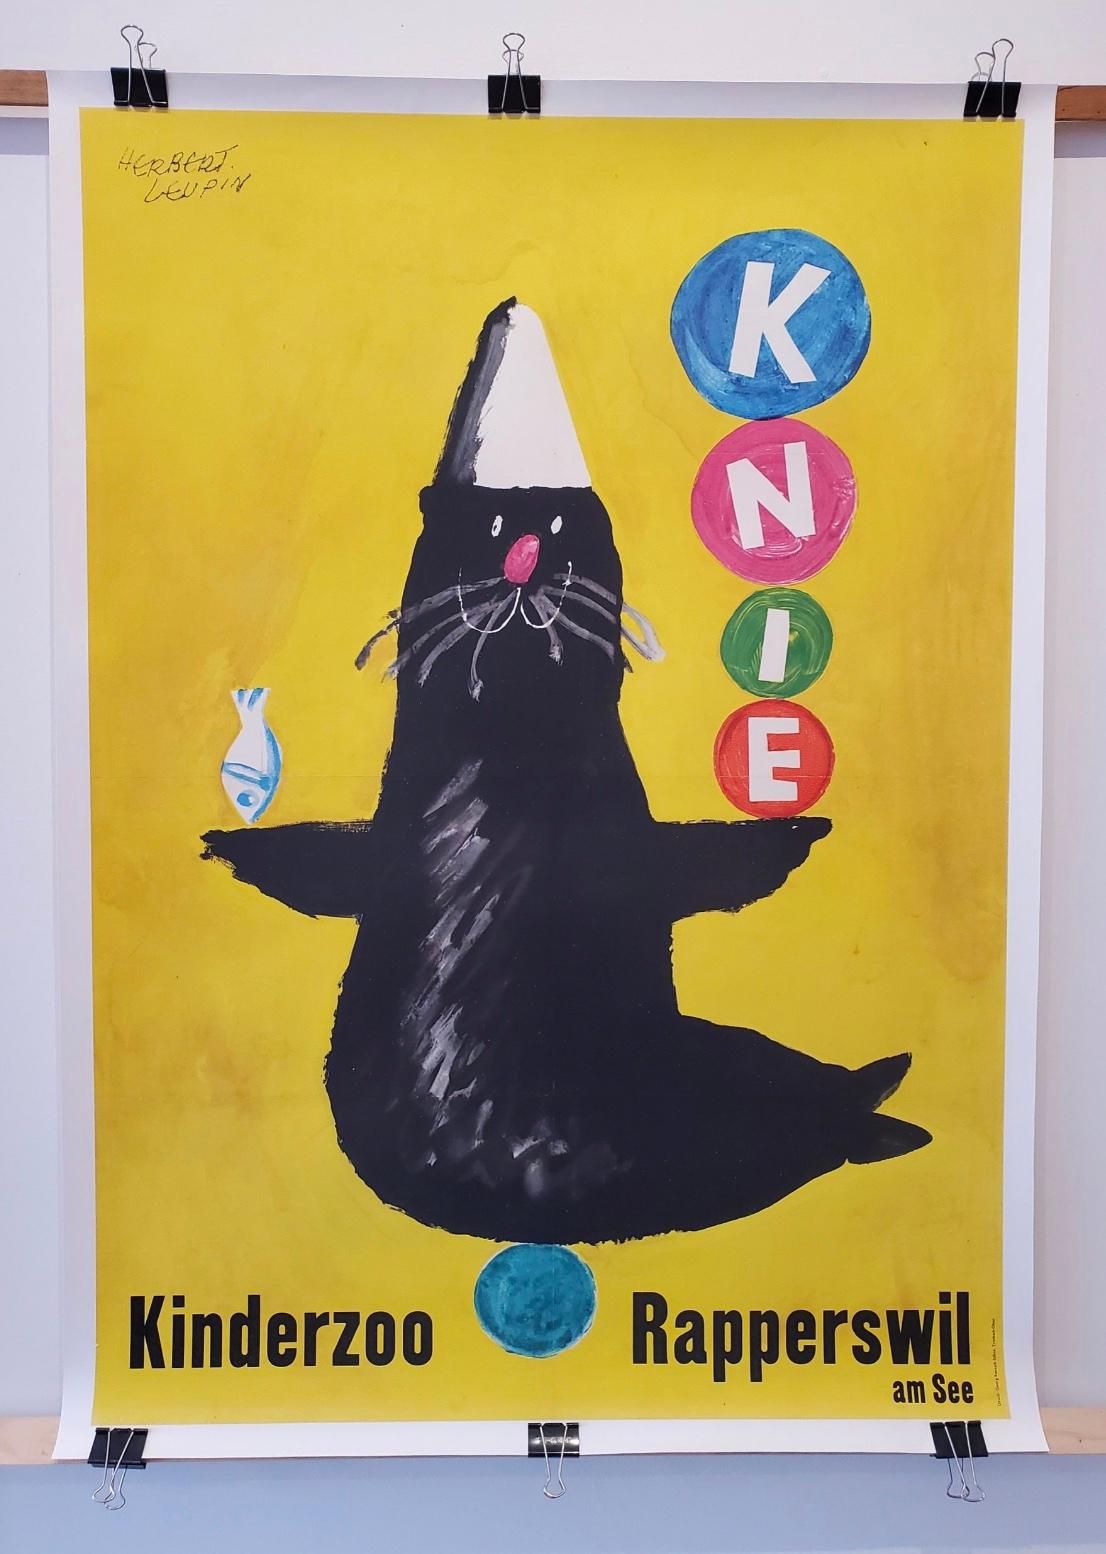 Knies Kinderzoo, original vintage poster circa 1964, by Herbert Leupin

A cheerful poster advertising the public zoo by Herbert Leupin. This is poster has vibrant colours and is linen backed for preservation. 


Artist
Herbert